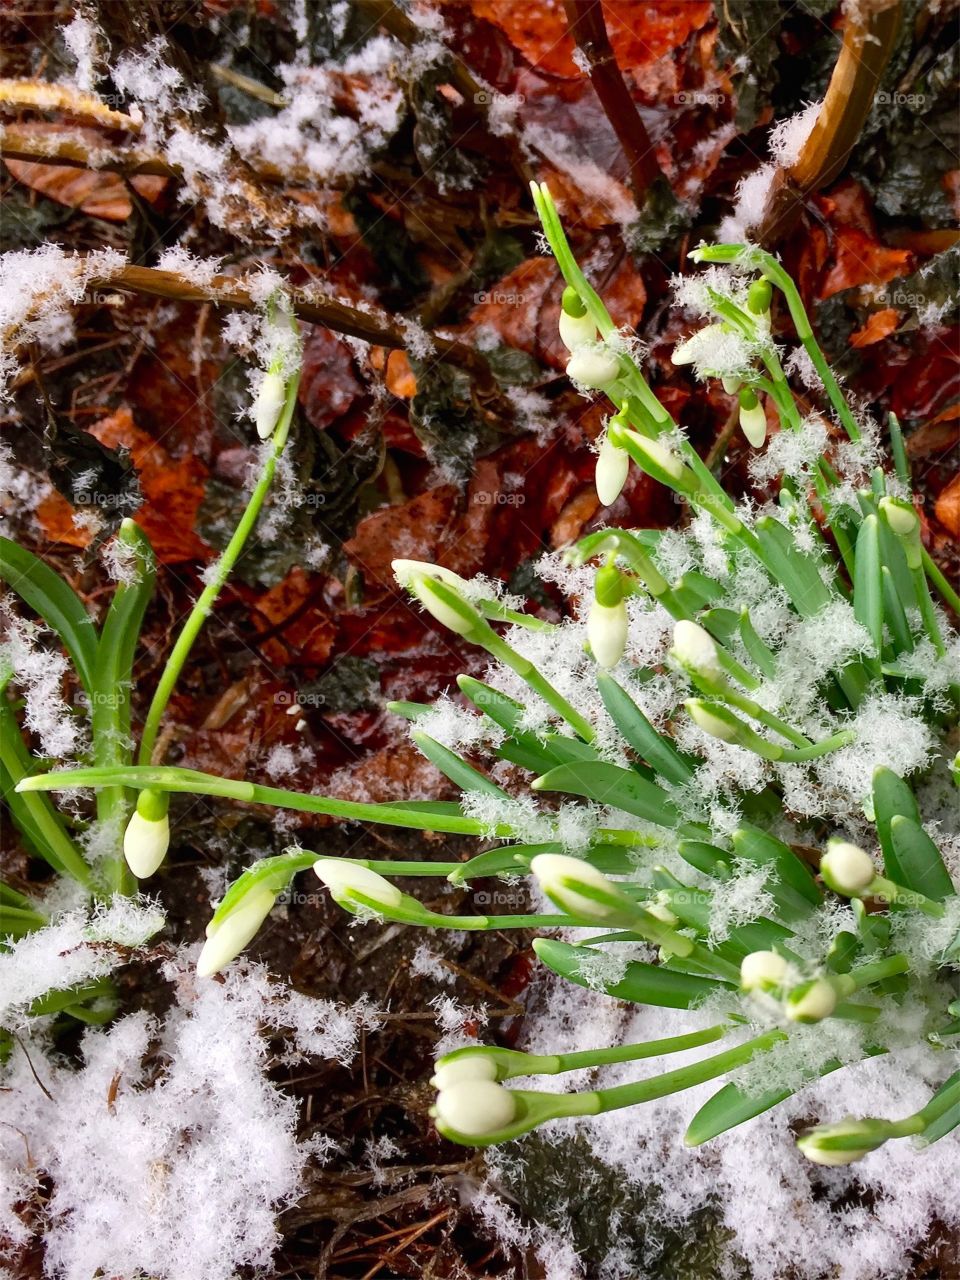 Snowdrops in bloom in the flowerbed with snow in March in Sweden.